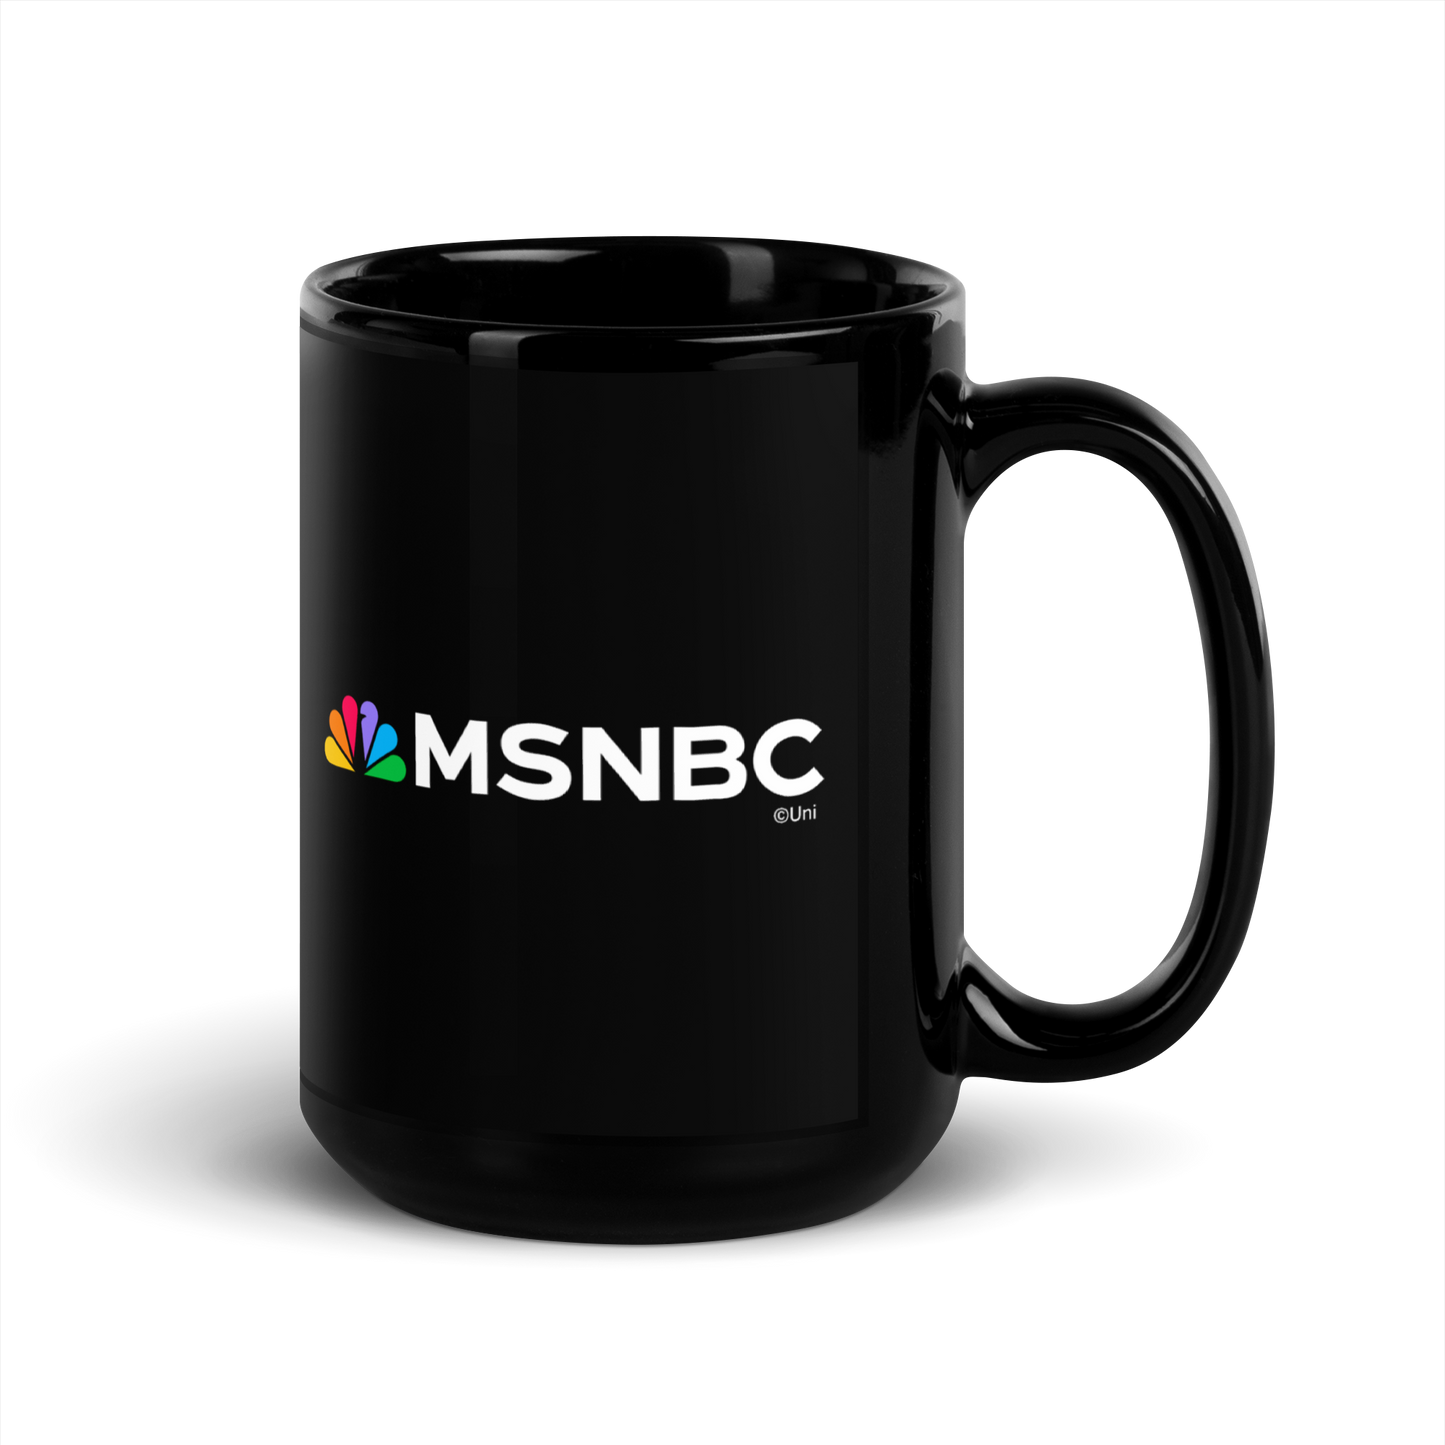 All In with Chris Hayes 10th Anniversary Mug